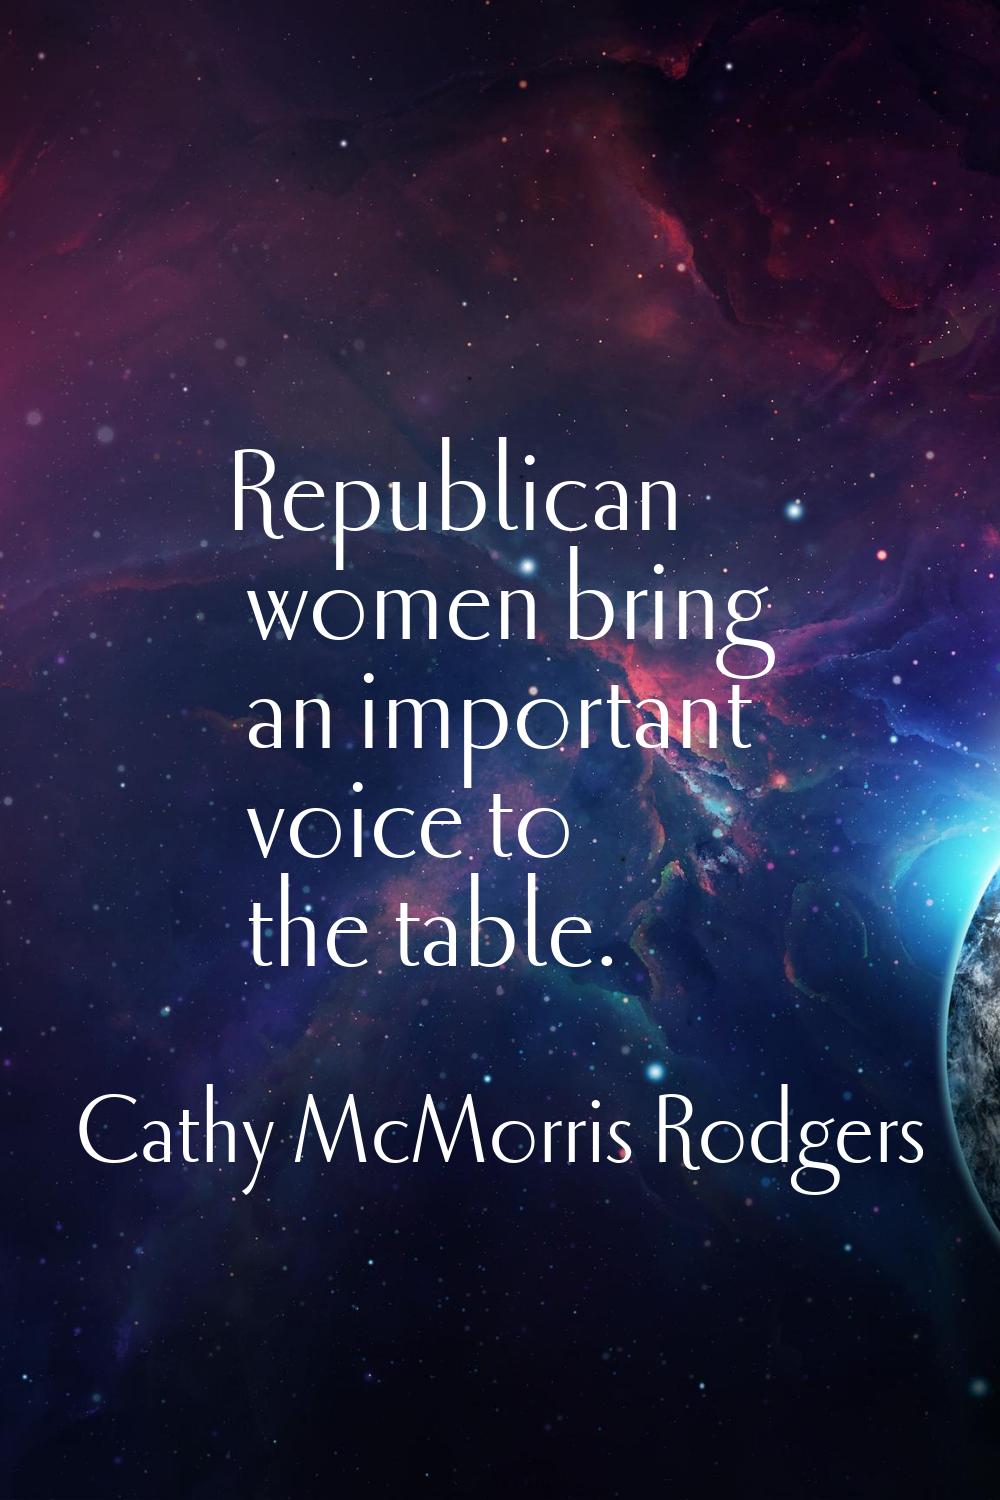 Republican women bring an important voice to the table.